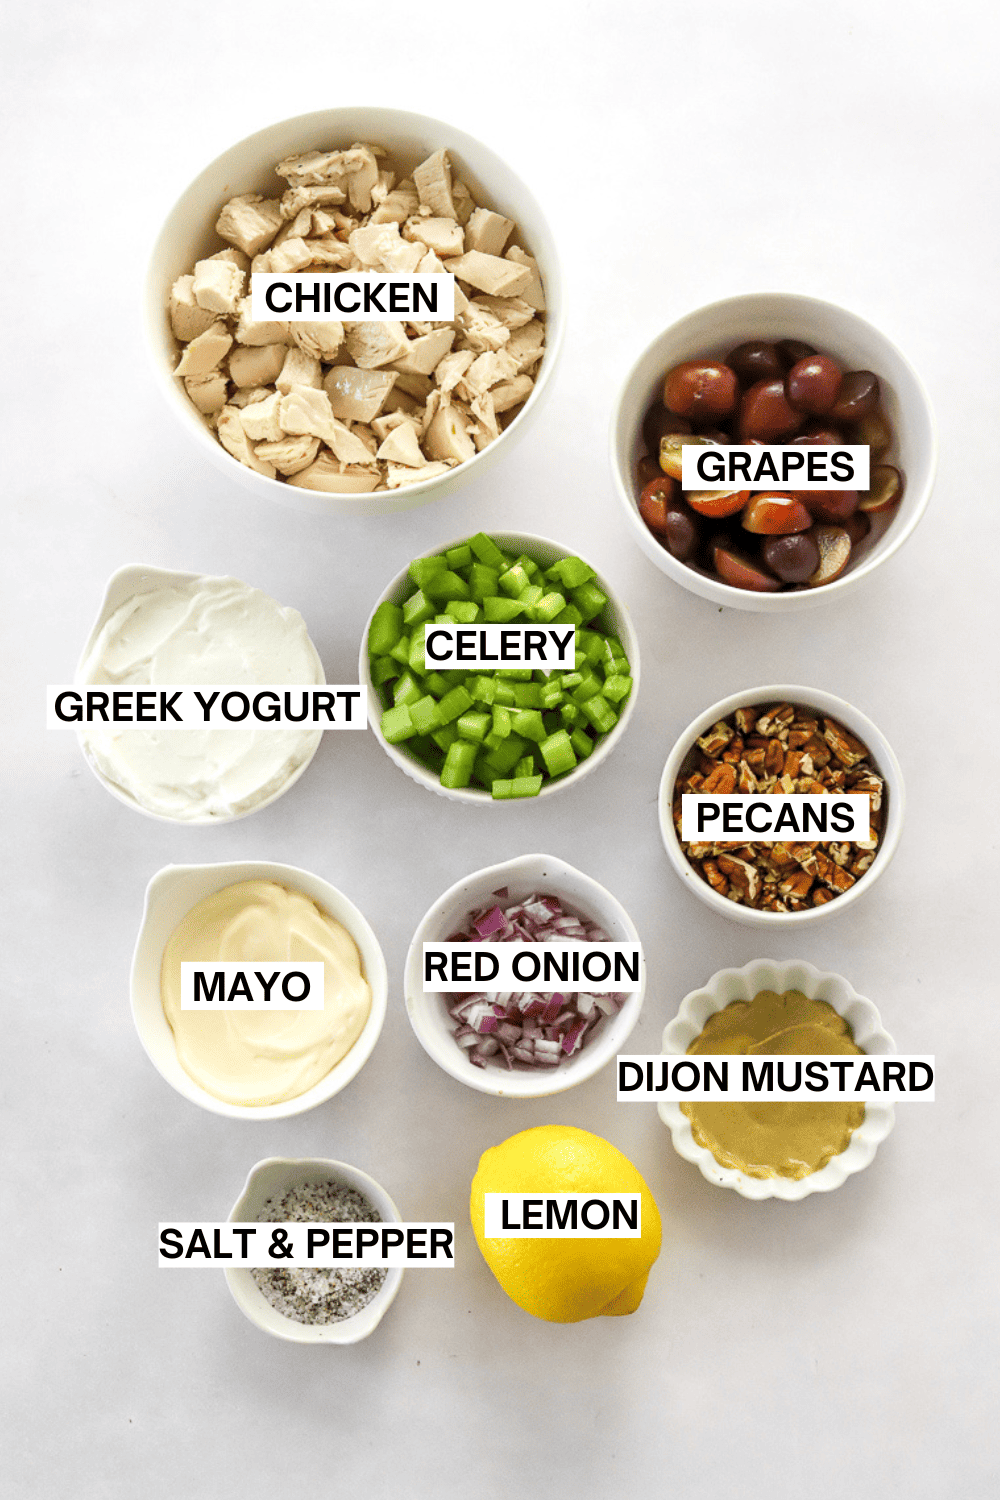 Ingredients for chicken salad in bowls with labels over each ingredient.